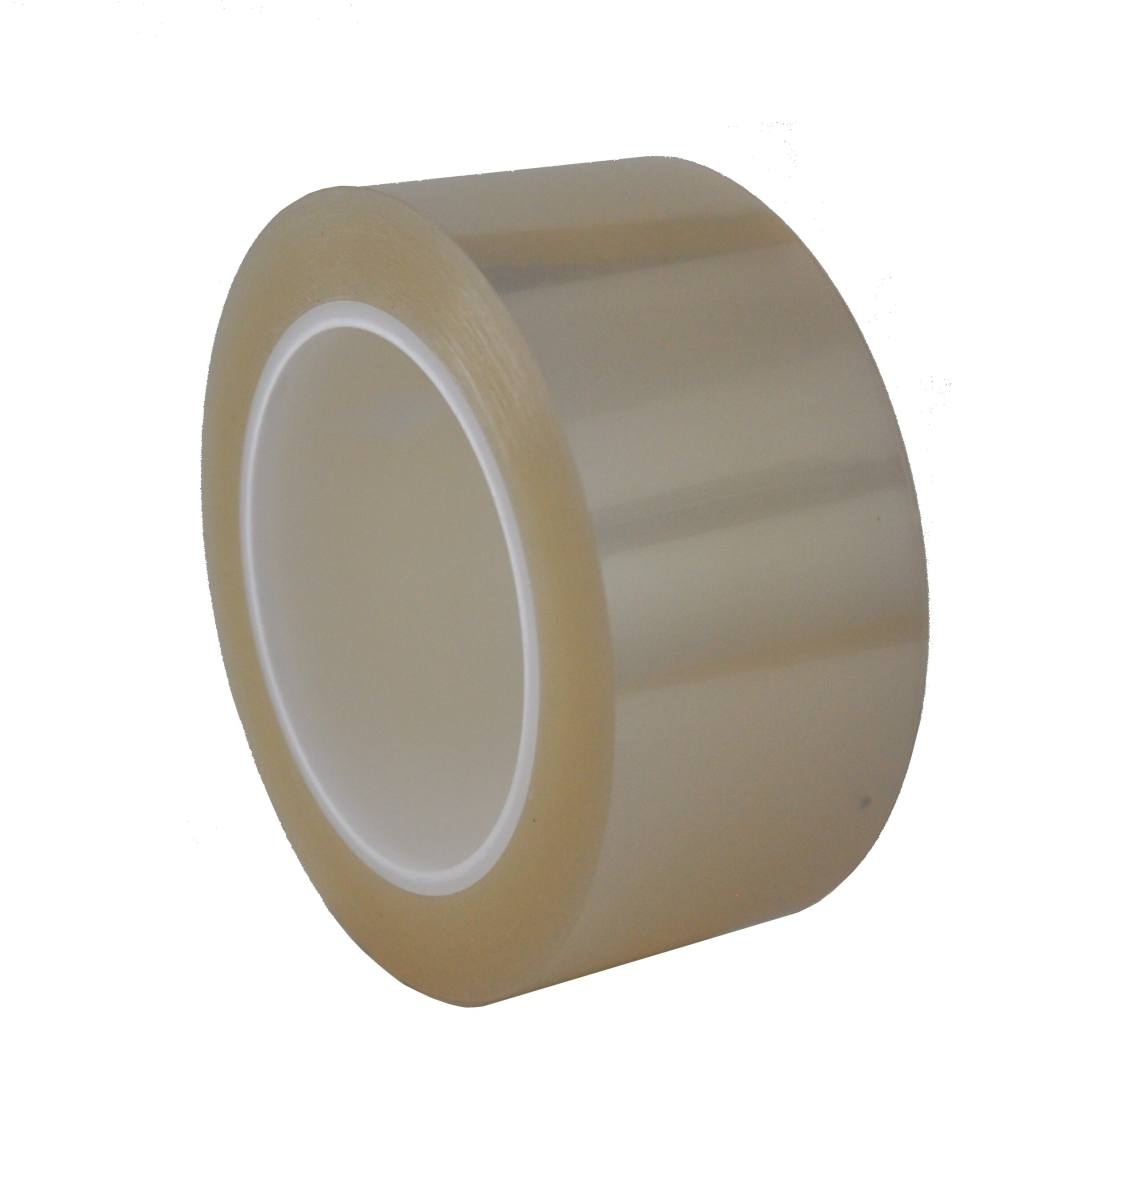 SKS fluorosilicone film, polyester film 0.075mm, 50mmx100m, coated on one side with fluorosilicone, transparent